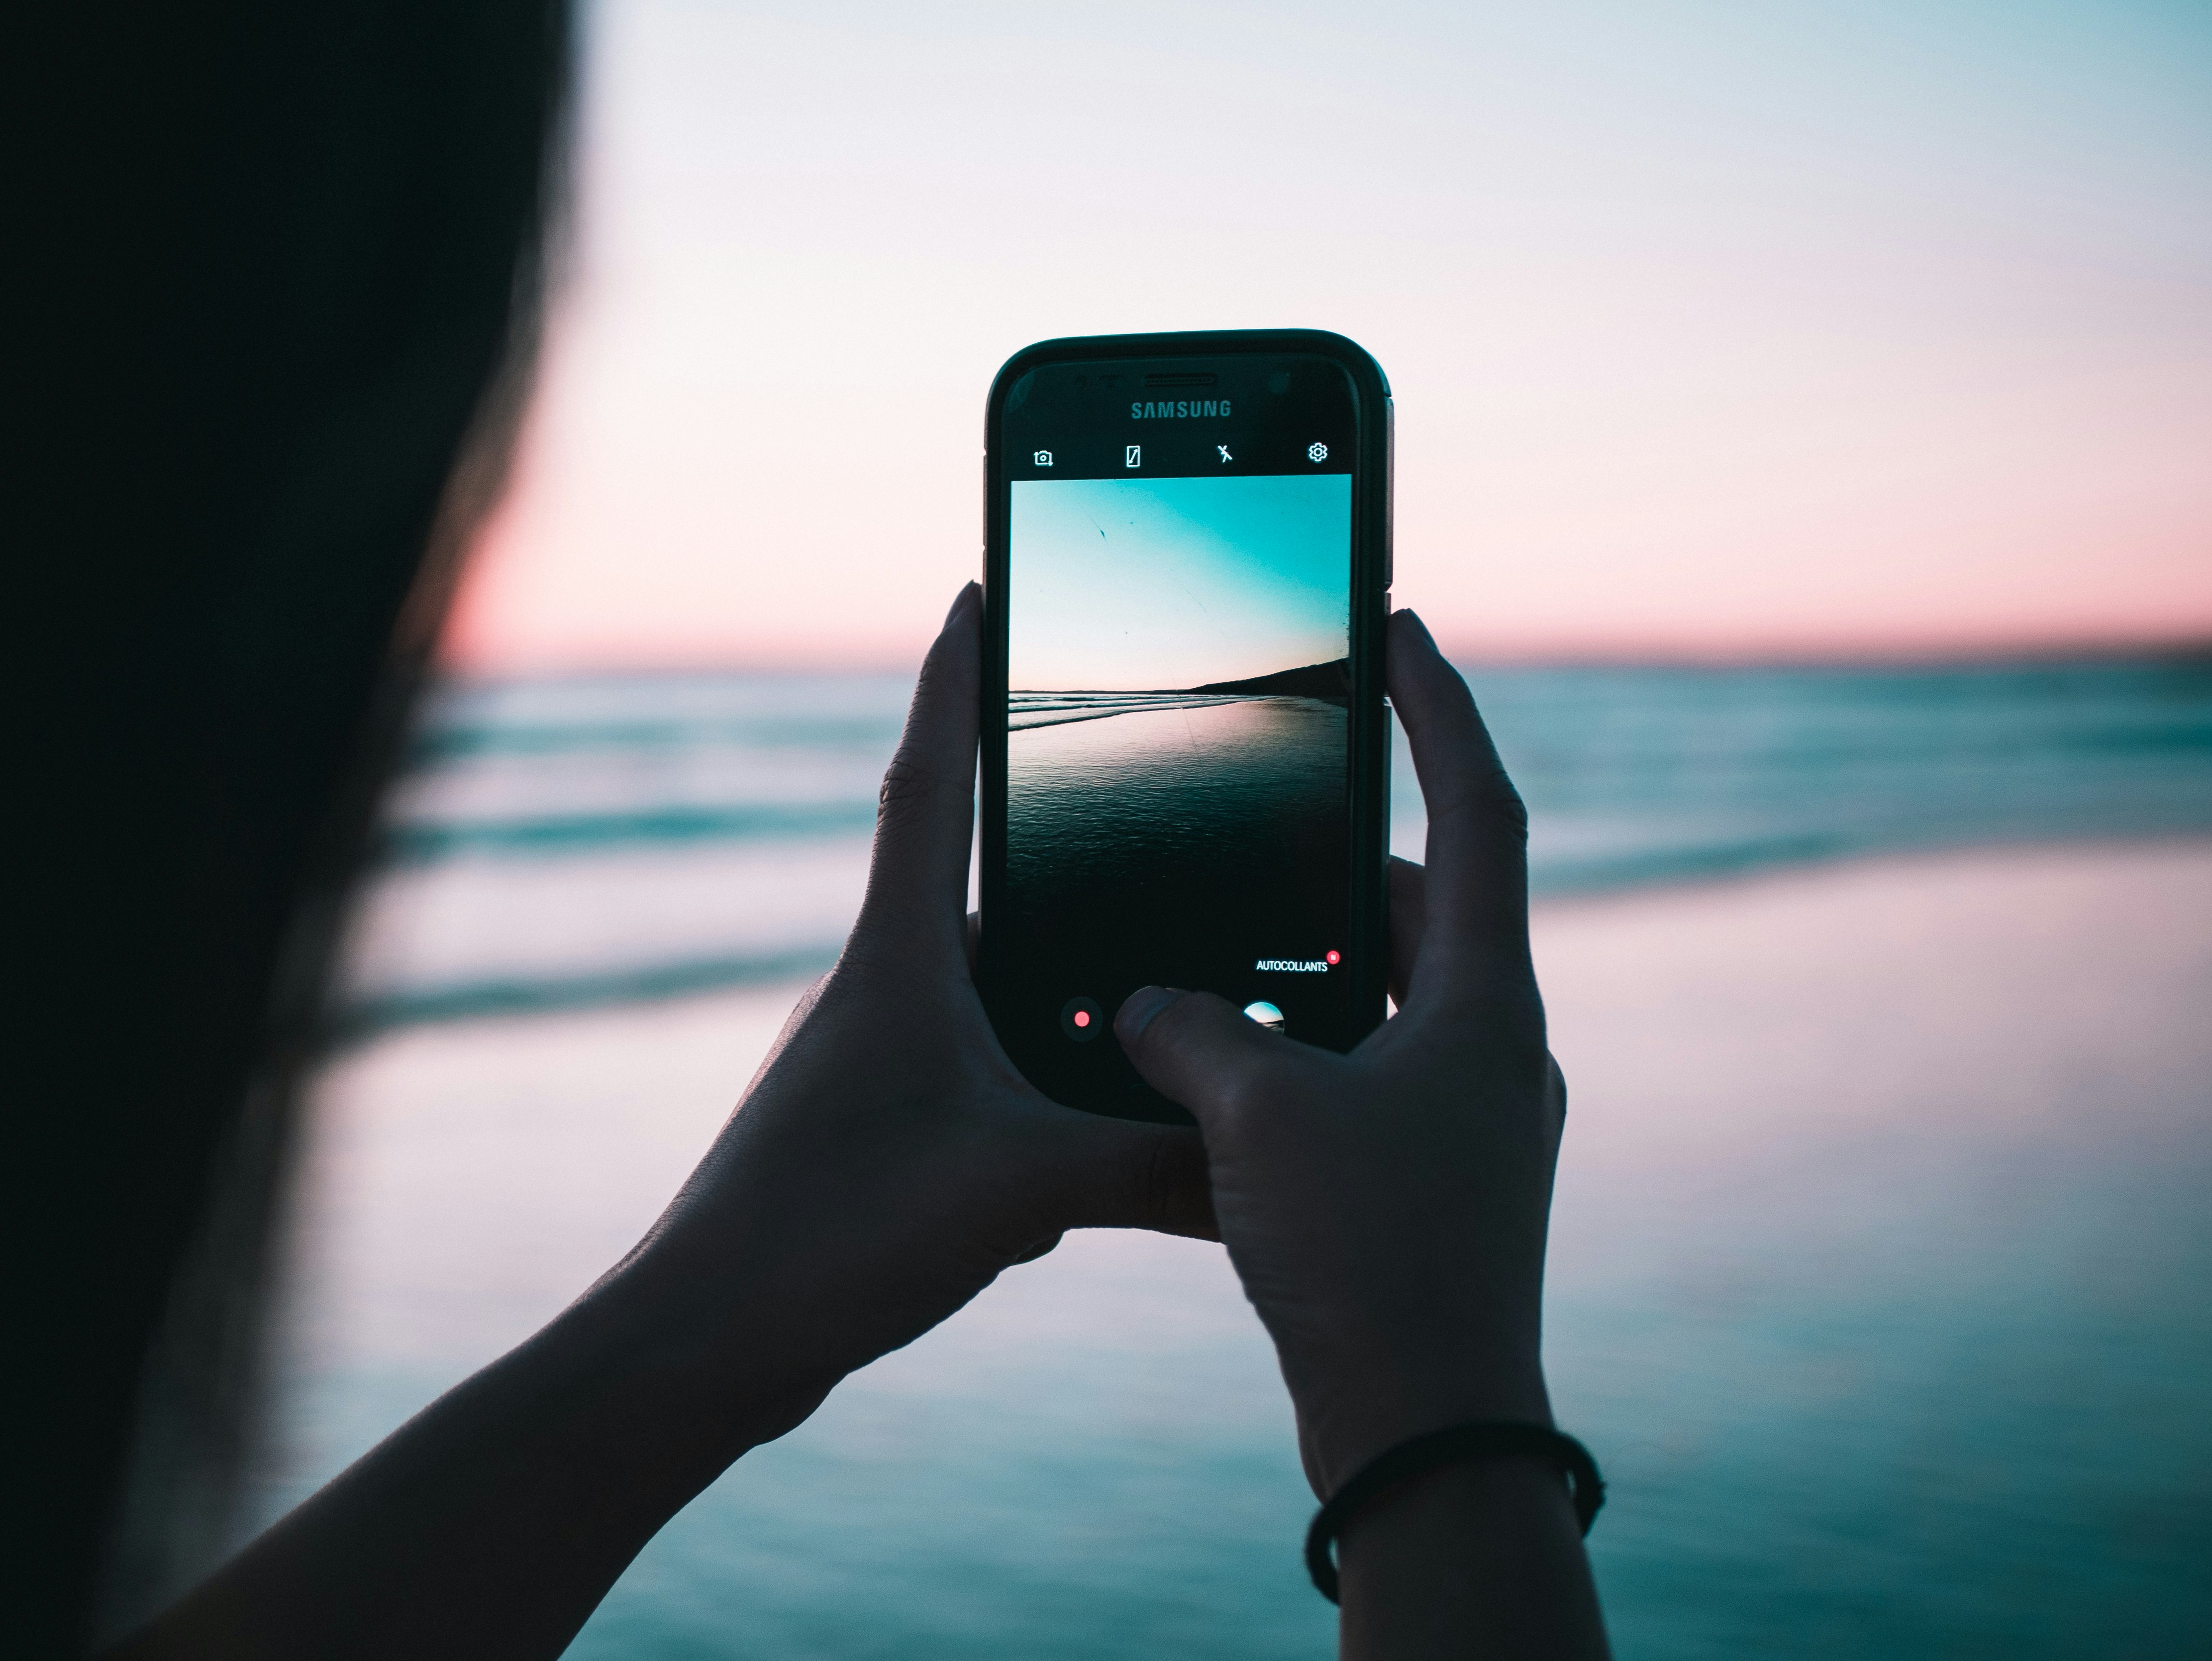 Photo of @laurianebetin’s phone taken on a summer evening on a beach in Brittany.